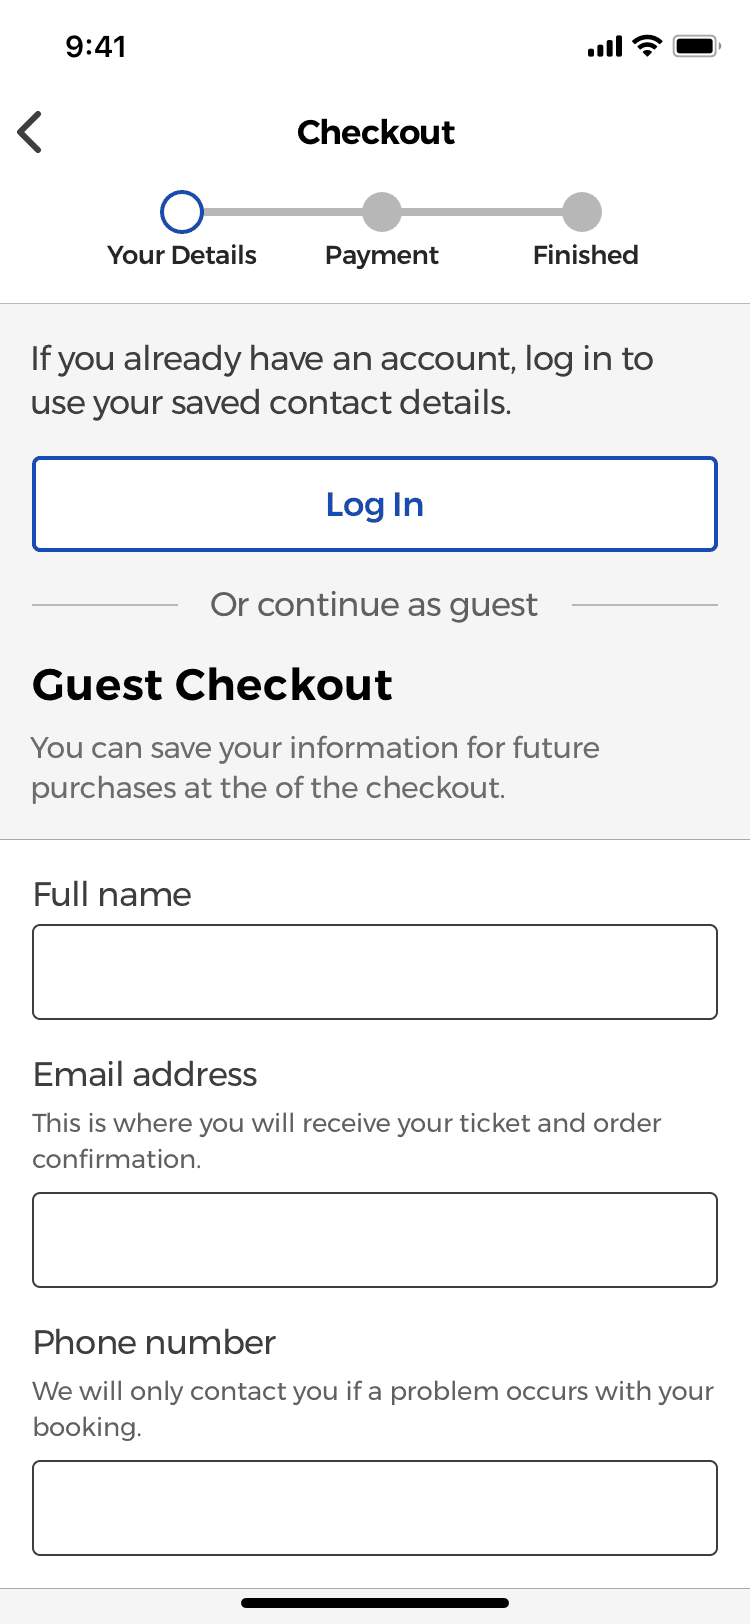 Users can sign in to use their saved personal information or as a guest, when booking a movie.